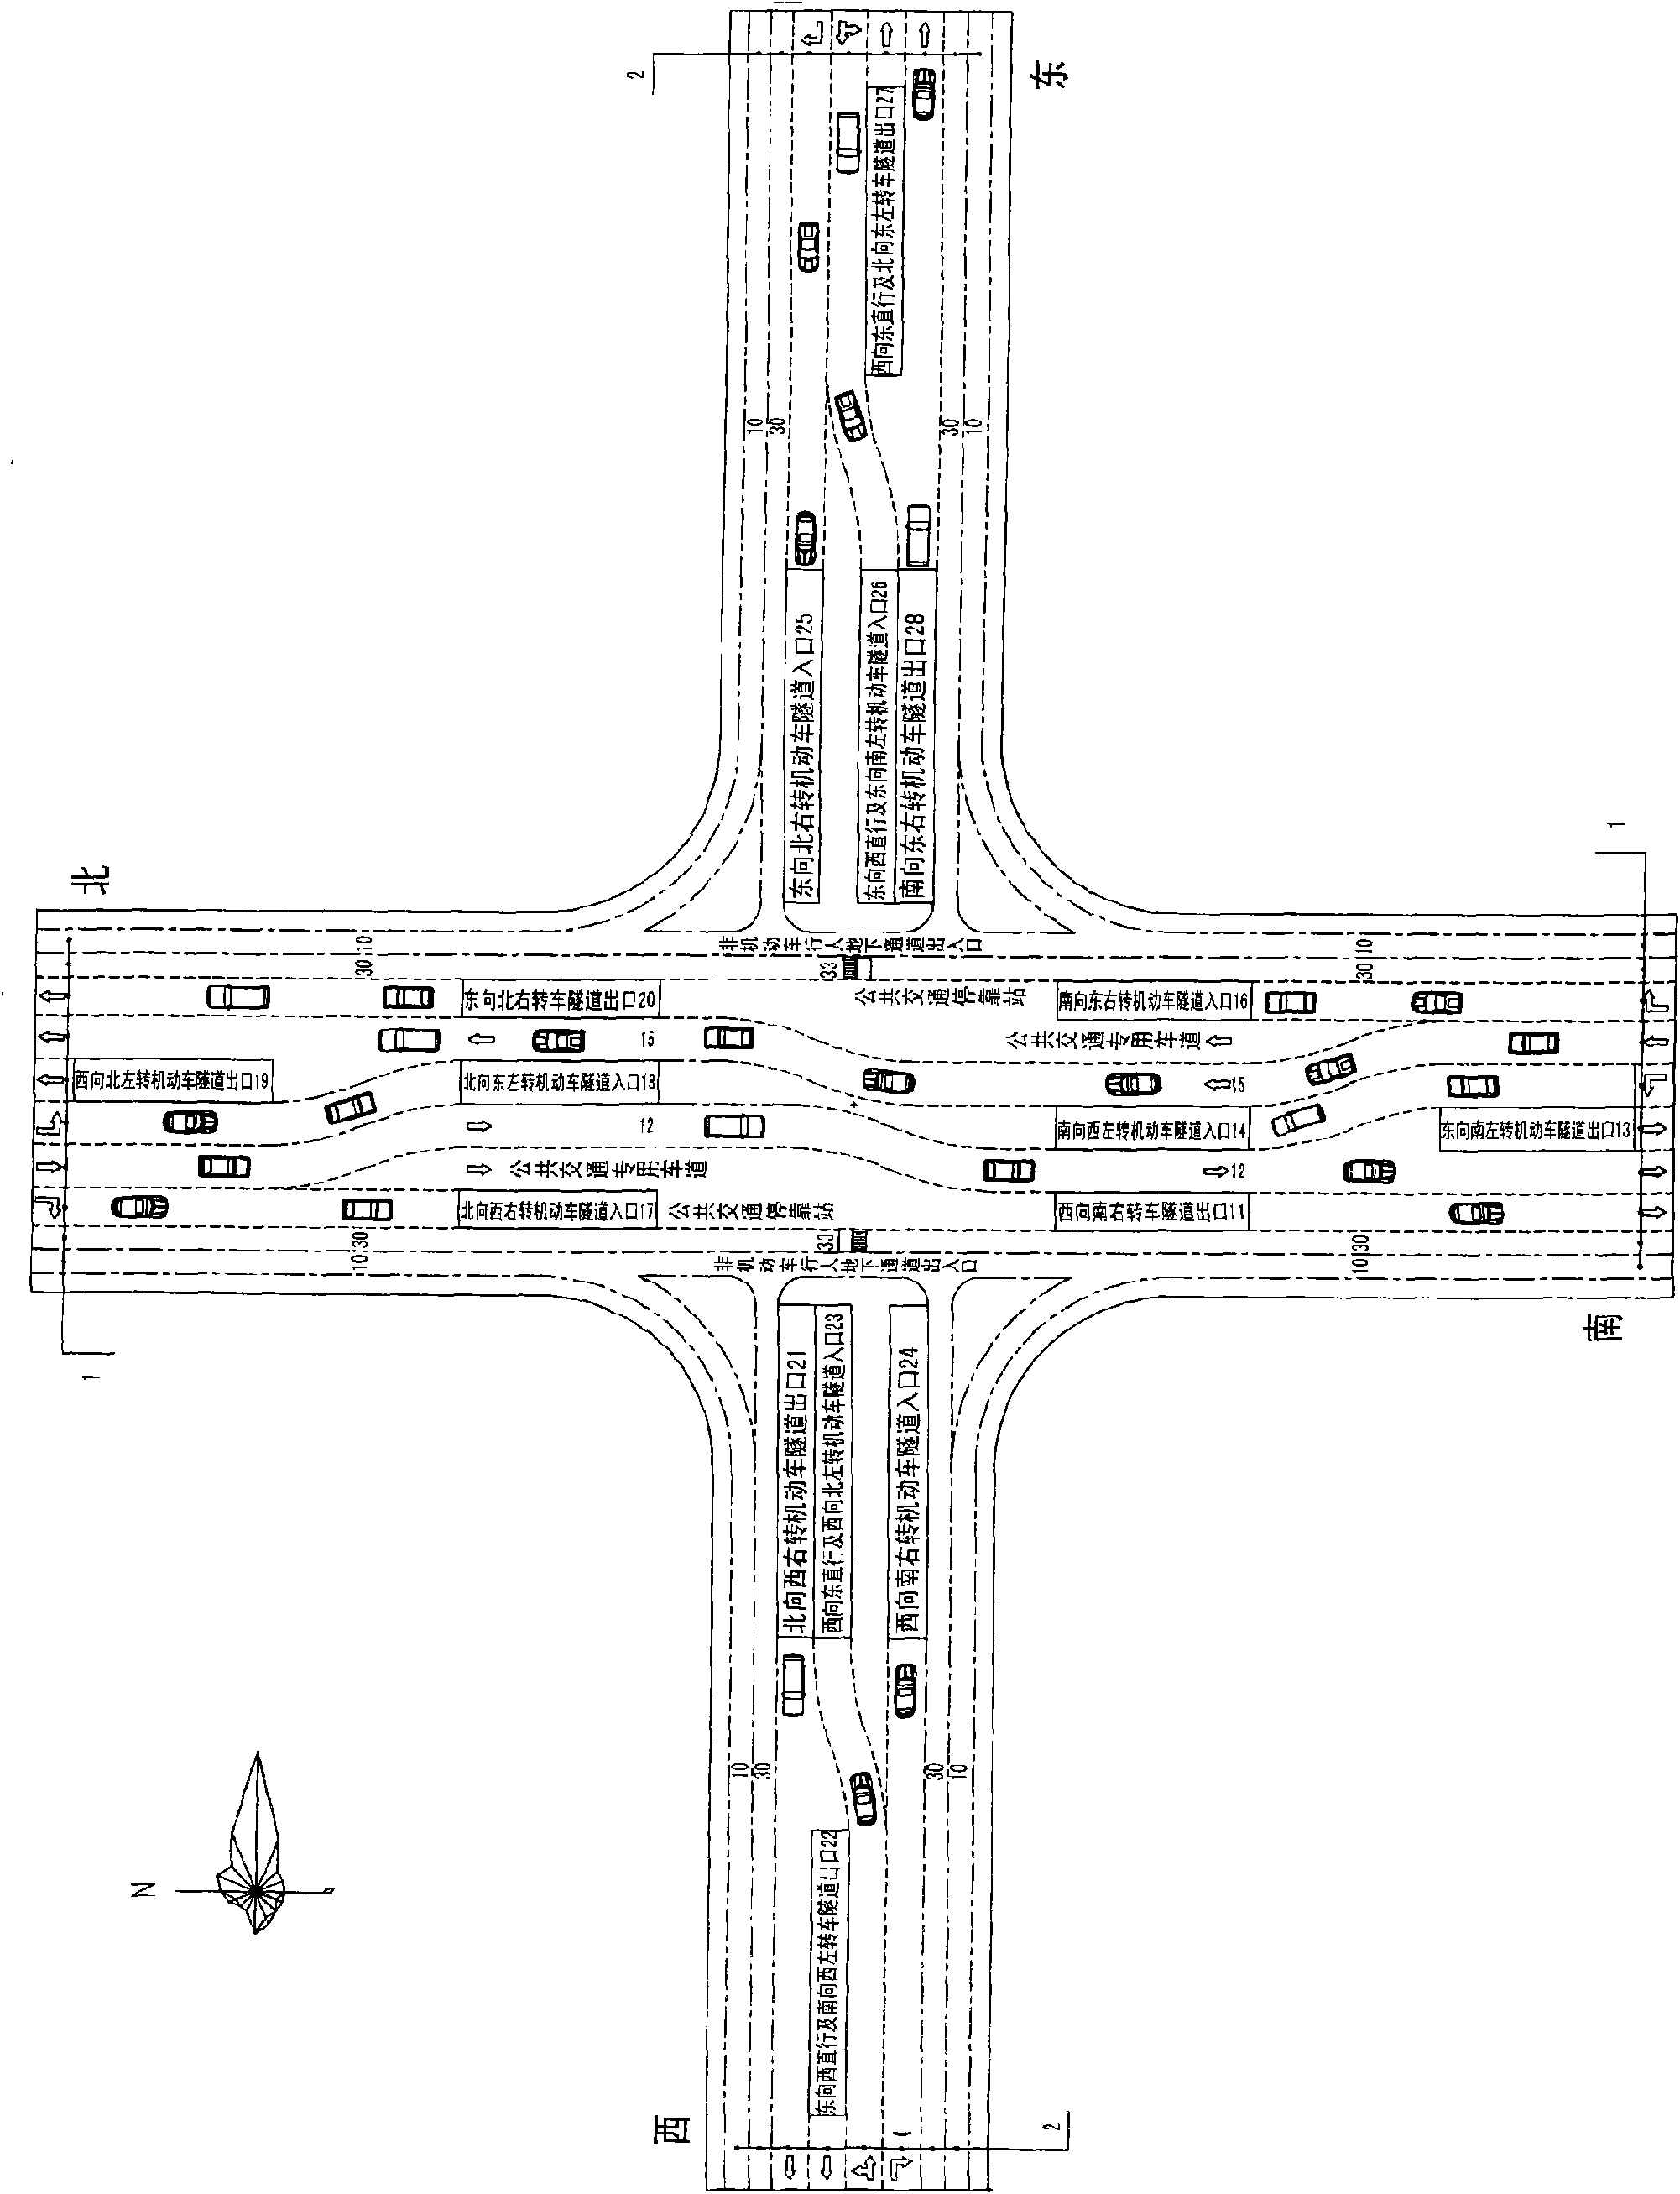 Full-communication and full-orientation three-dimensional traffic system